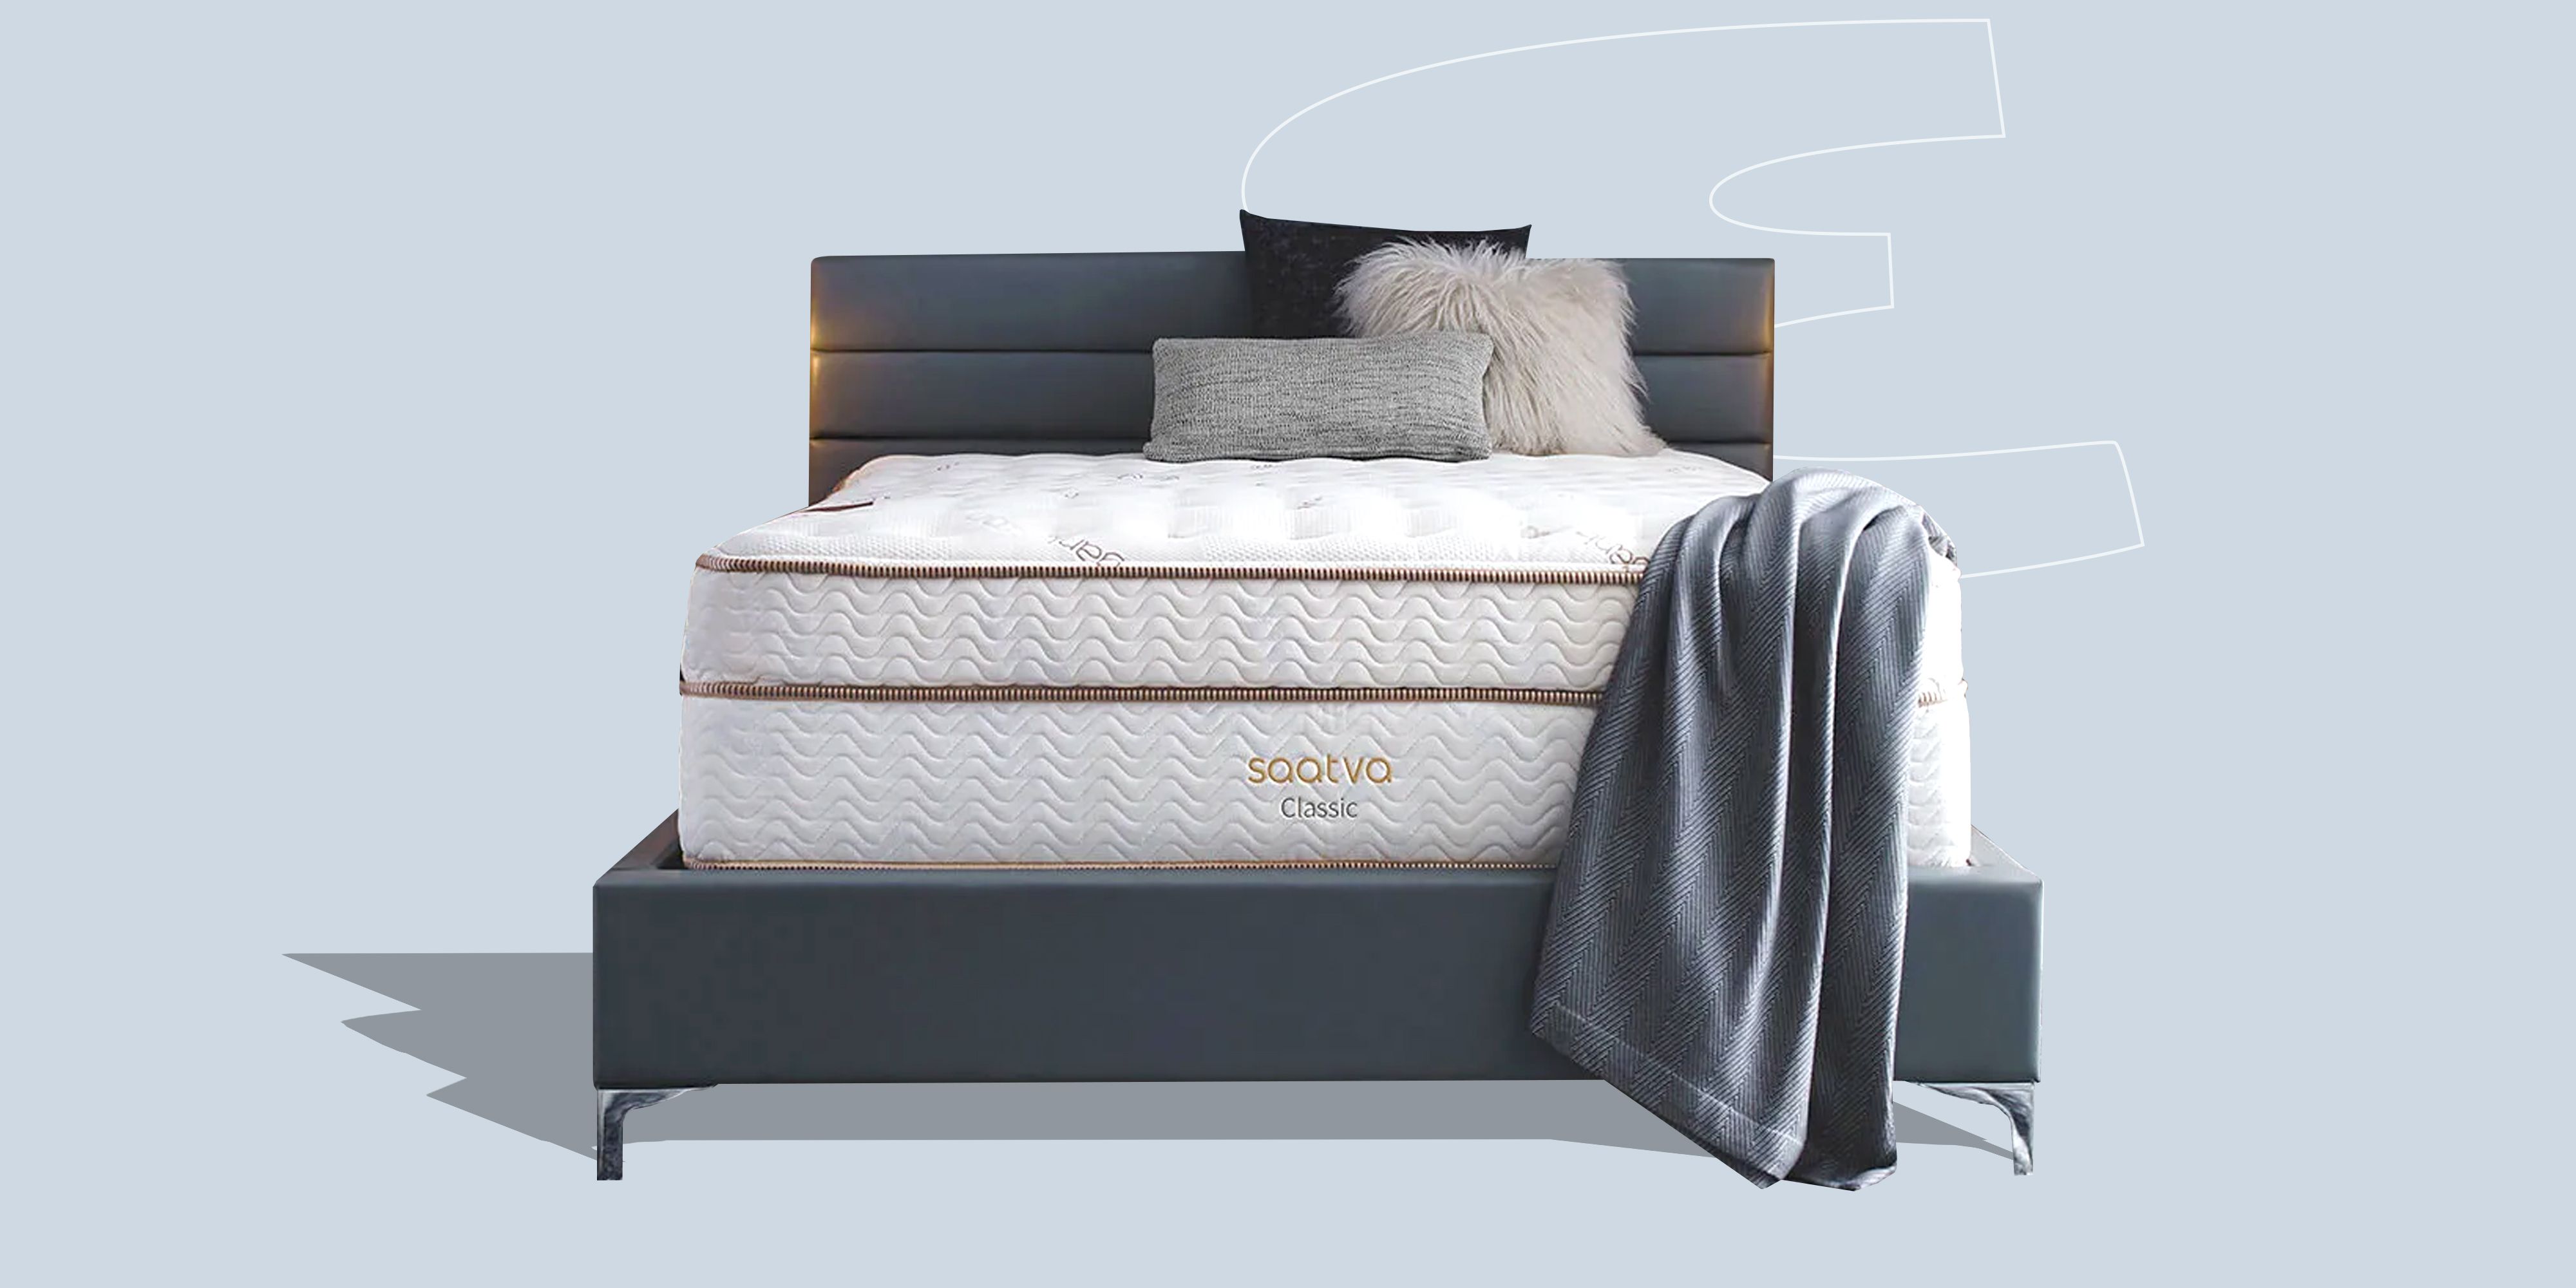 Review of Instagram's Favorite Pieces of Furniture: The Floyd Bed